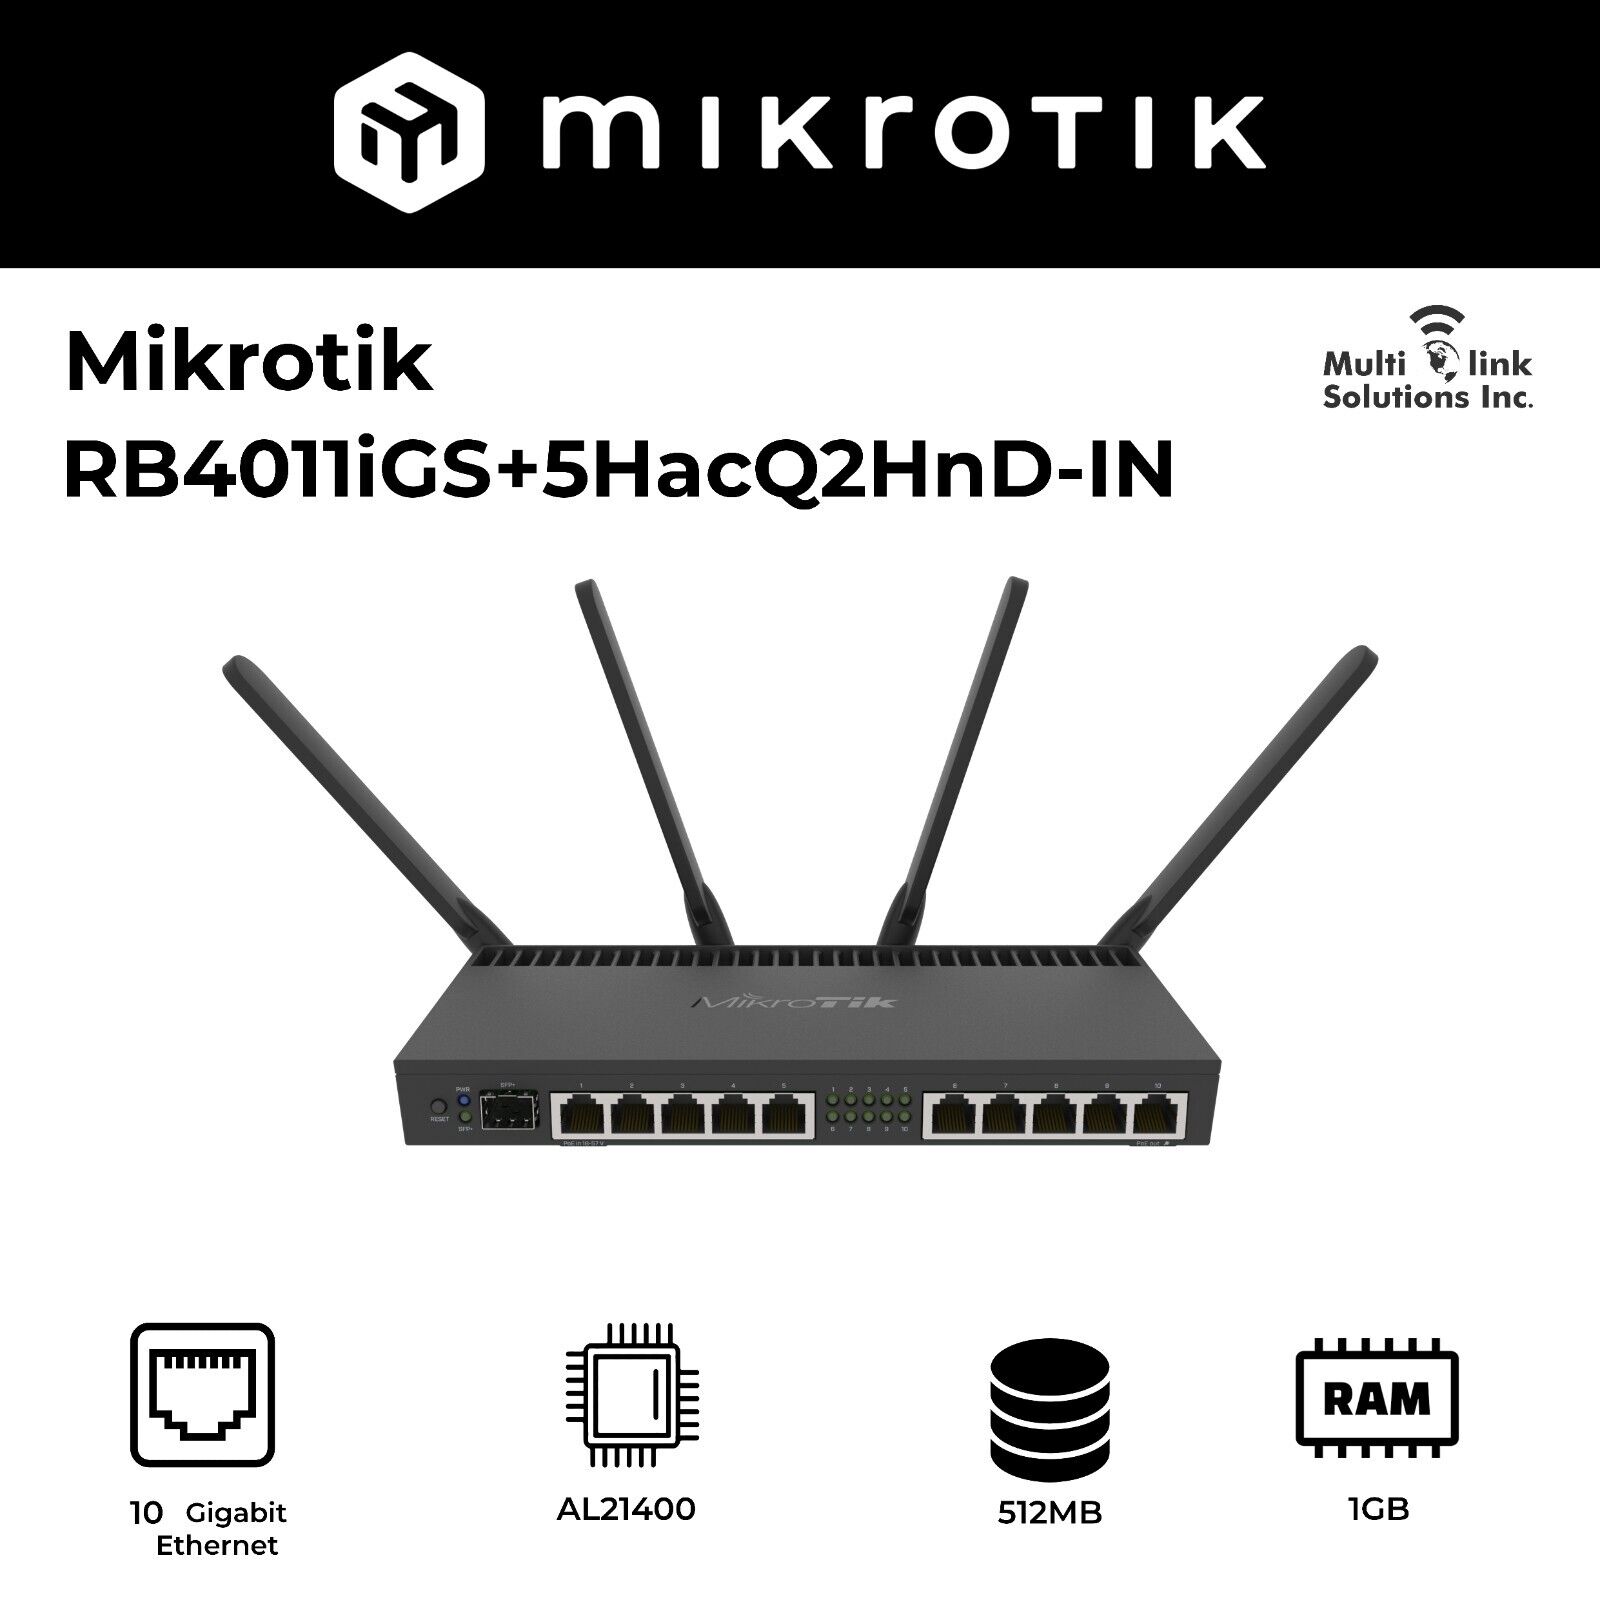 MikroTik RB4011iGS+5HacQ2HnD-IN with 10 Gigabit ports, SFP+ 10Gbp